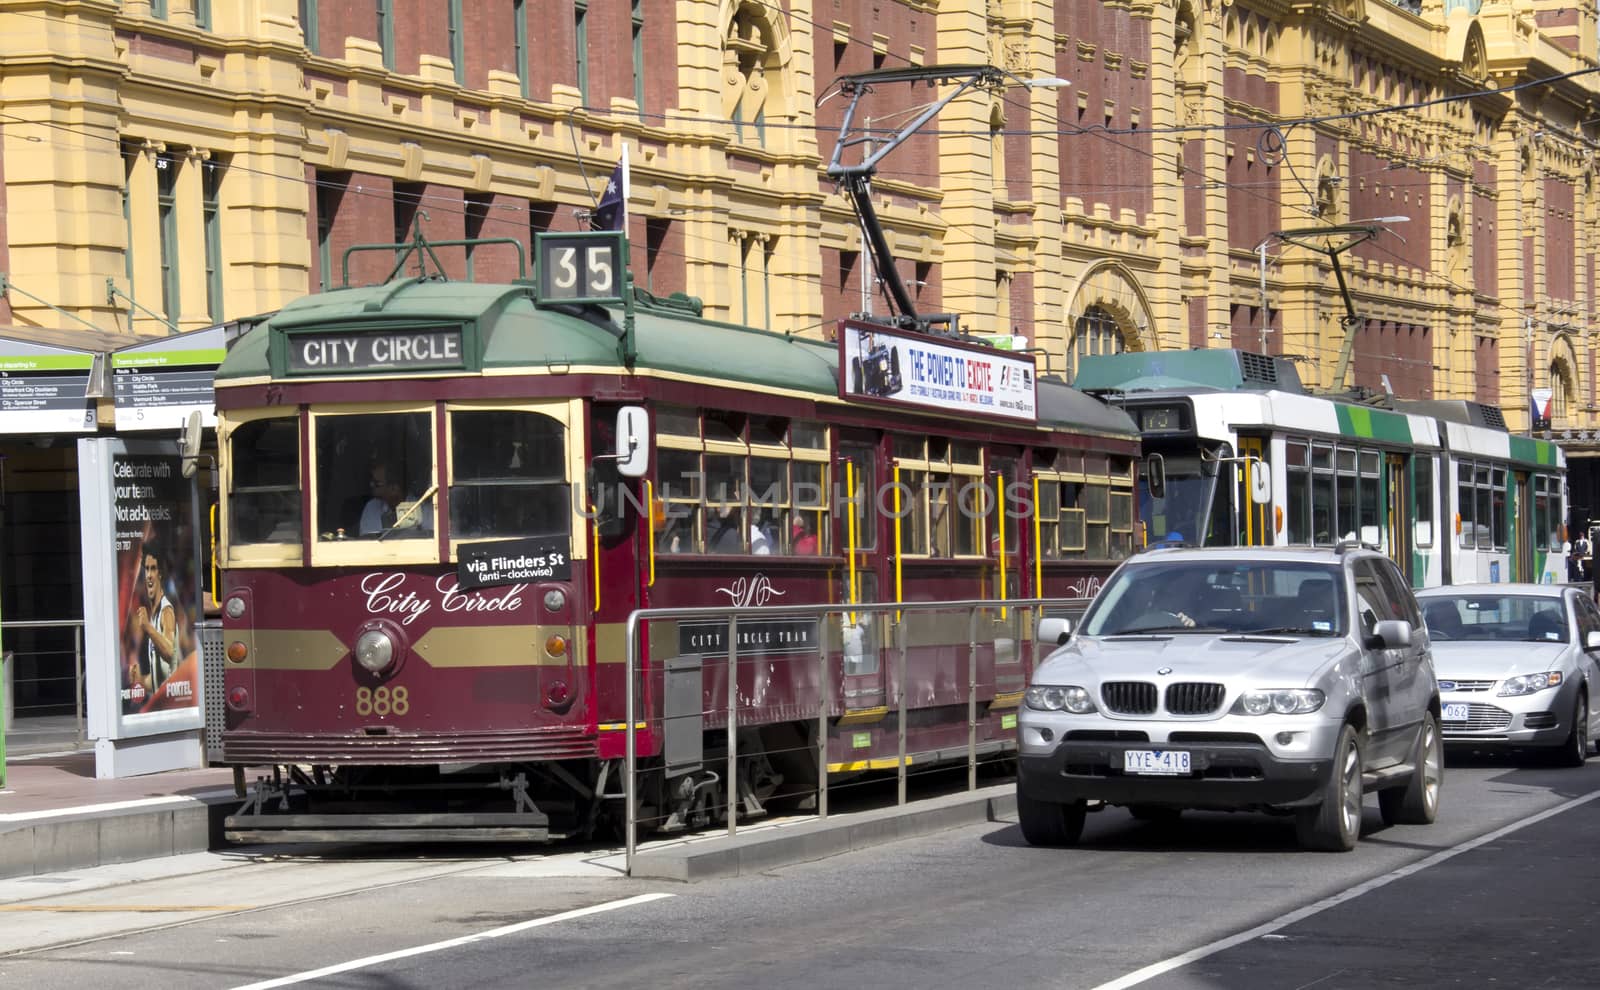 Melbourne, Australia-March 18th 2013: City Circle tram and cars outside Flinders St station. The tram route is a free service running around Melbourne's CBD.